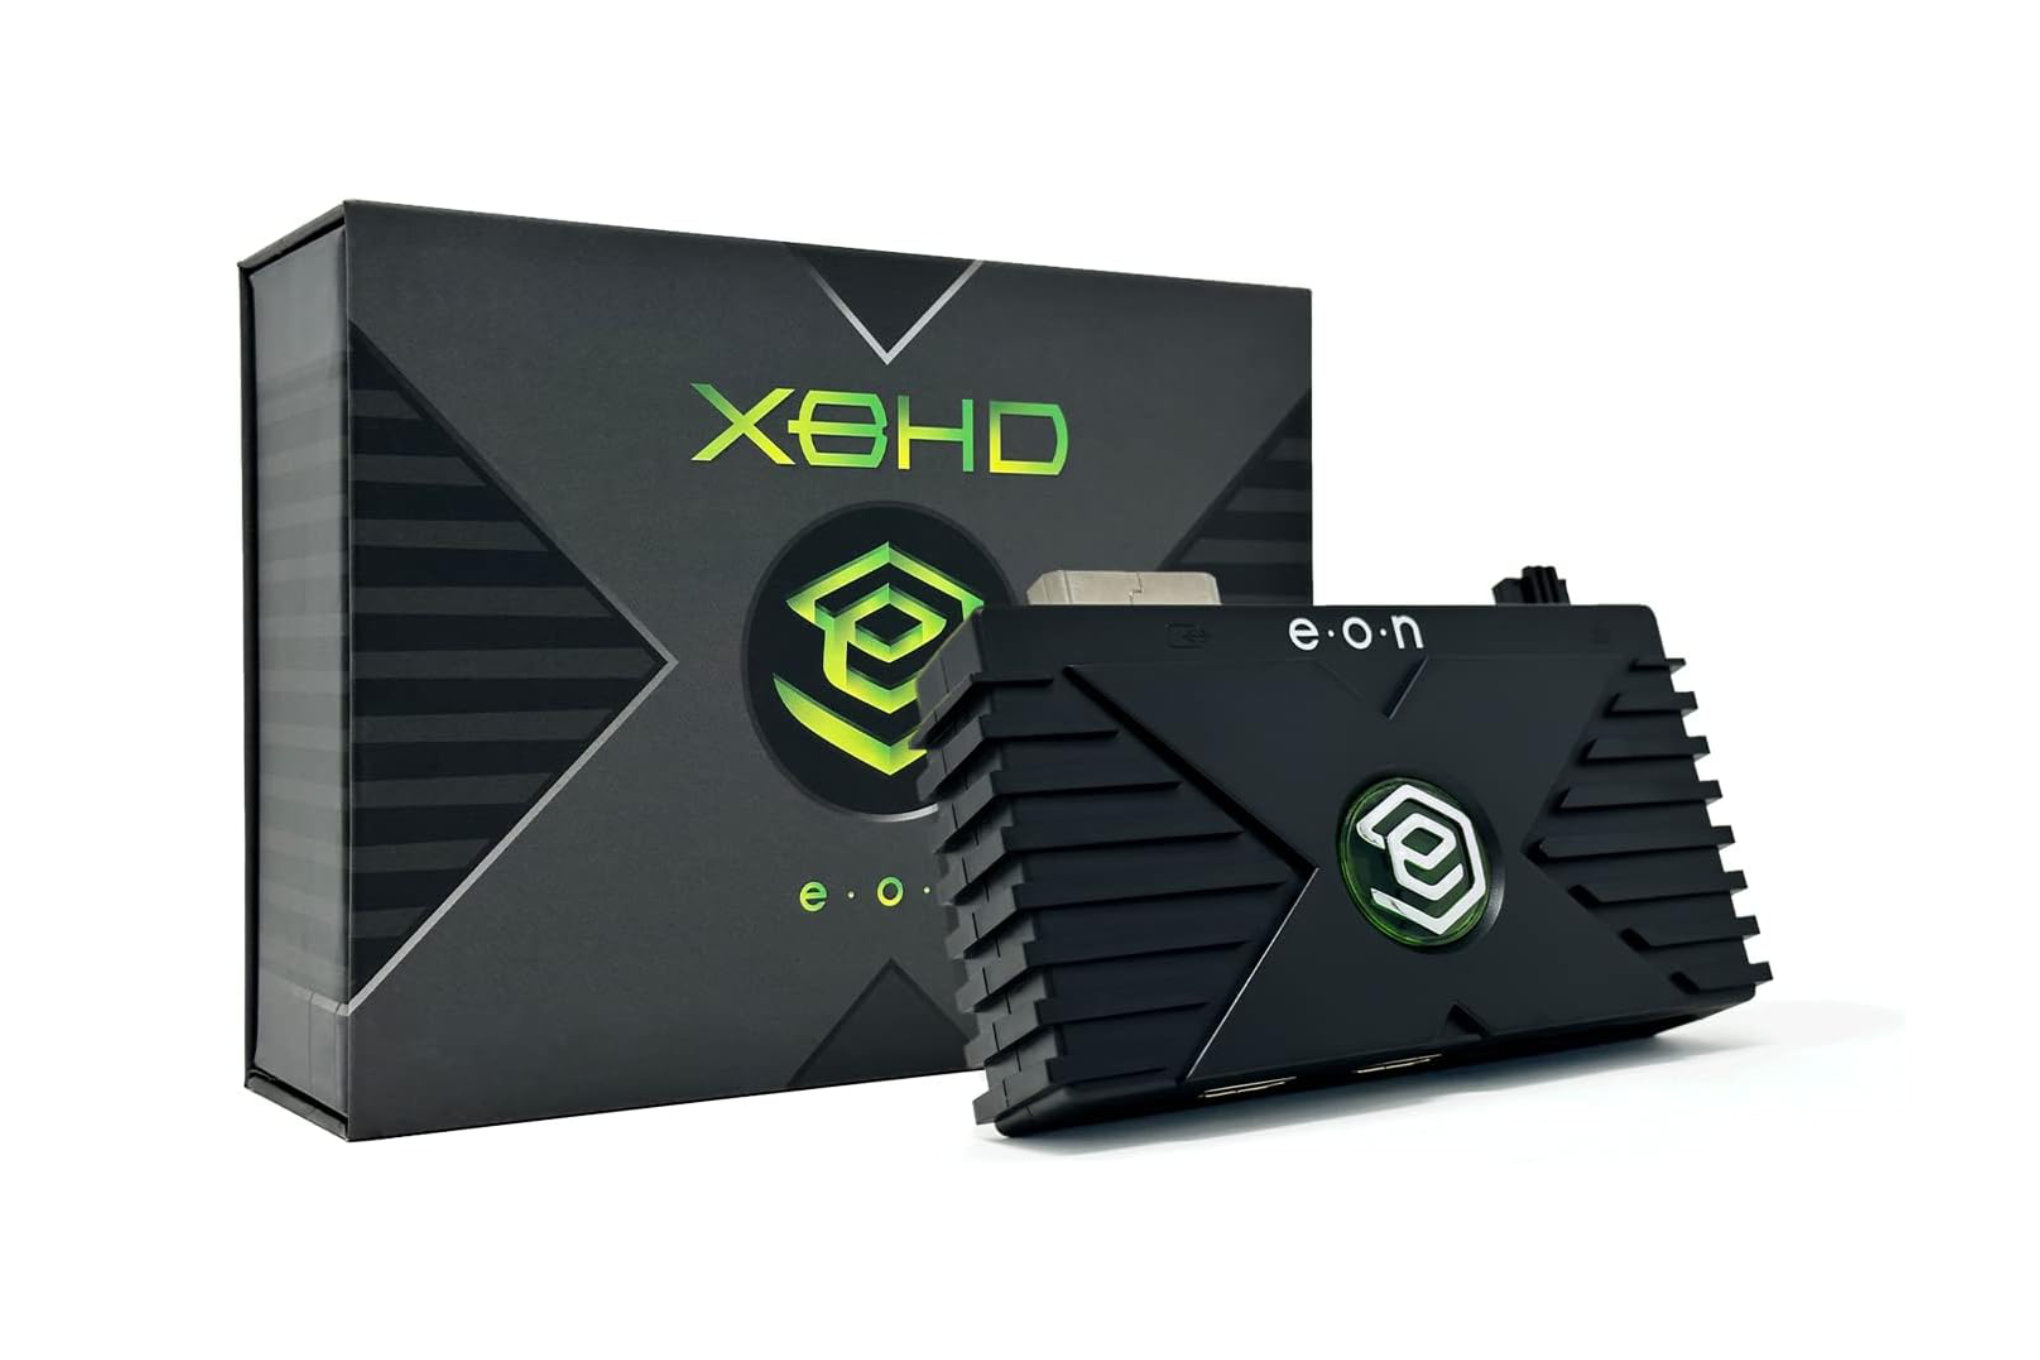 A photo of the XBHD accessory by EON Gaming that plugs into the original Xbox to enable HD video quality.